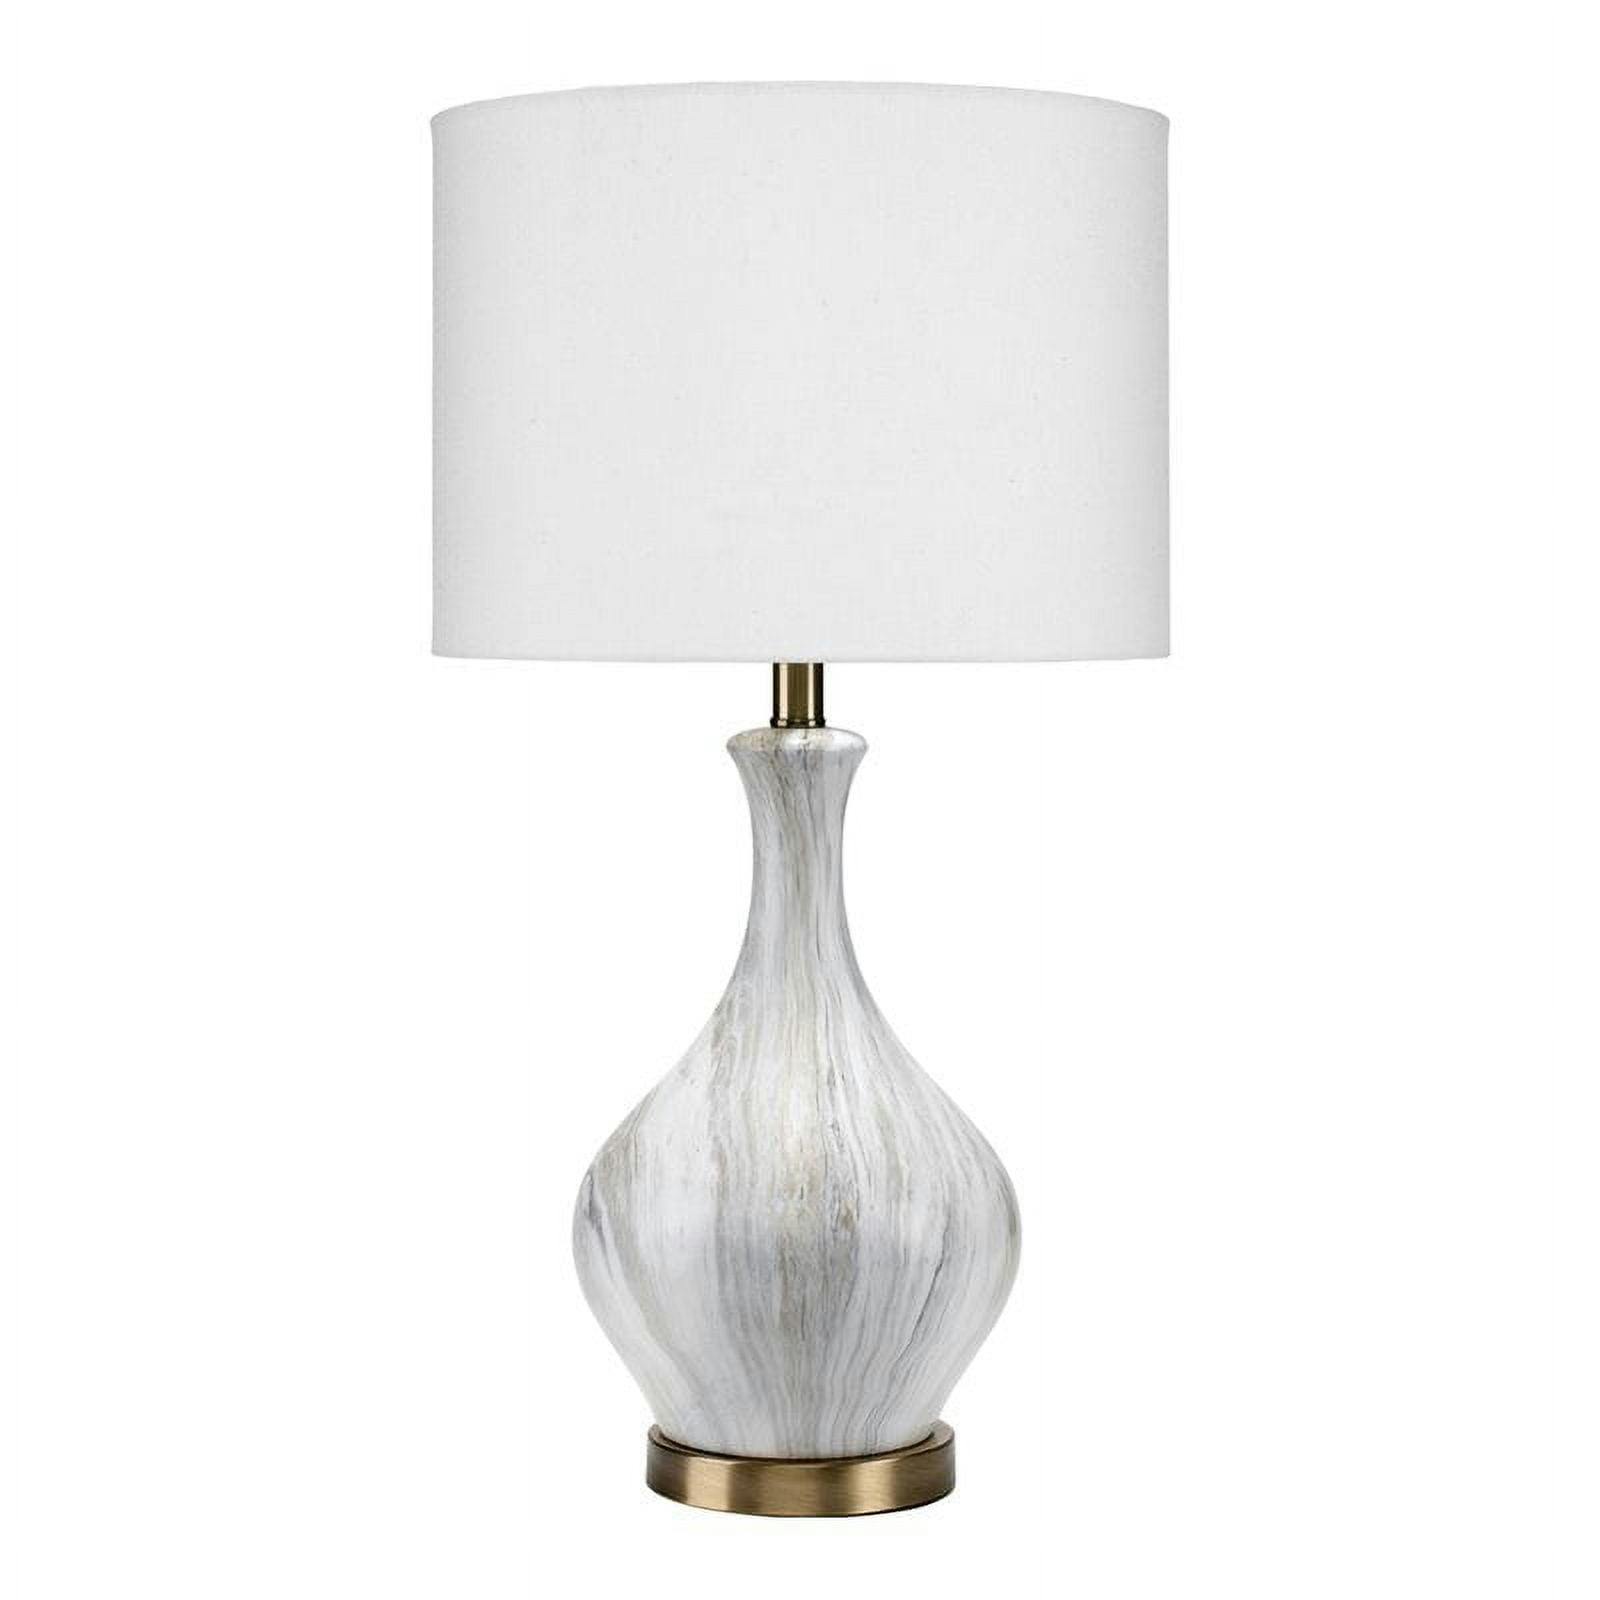 Mila 29" Faux Marble Ceramic Table Lamp with Brass Accents and Linen Shade